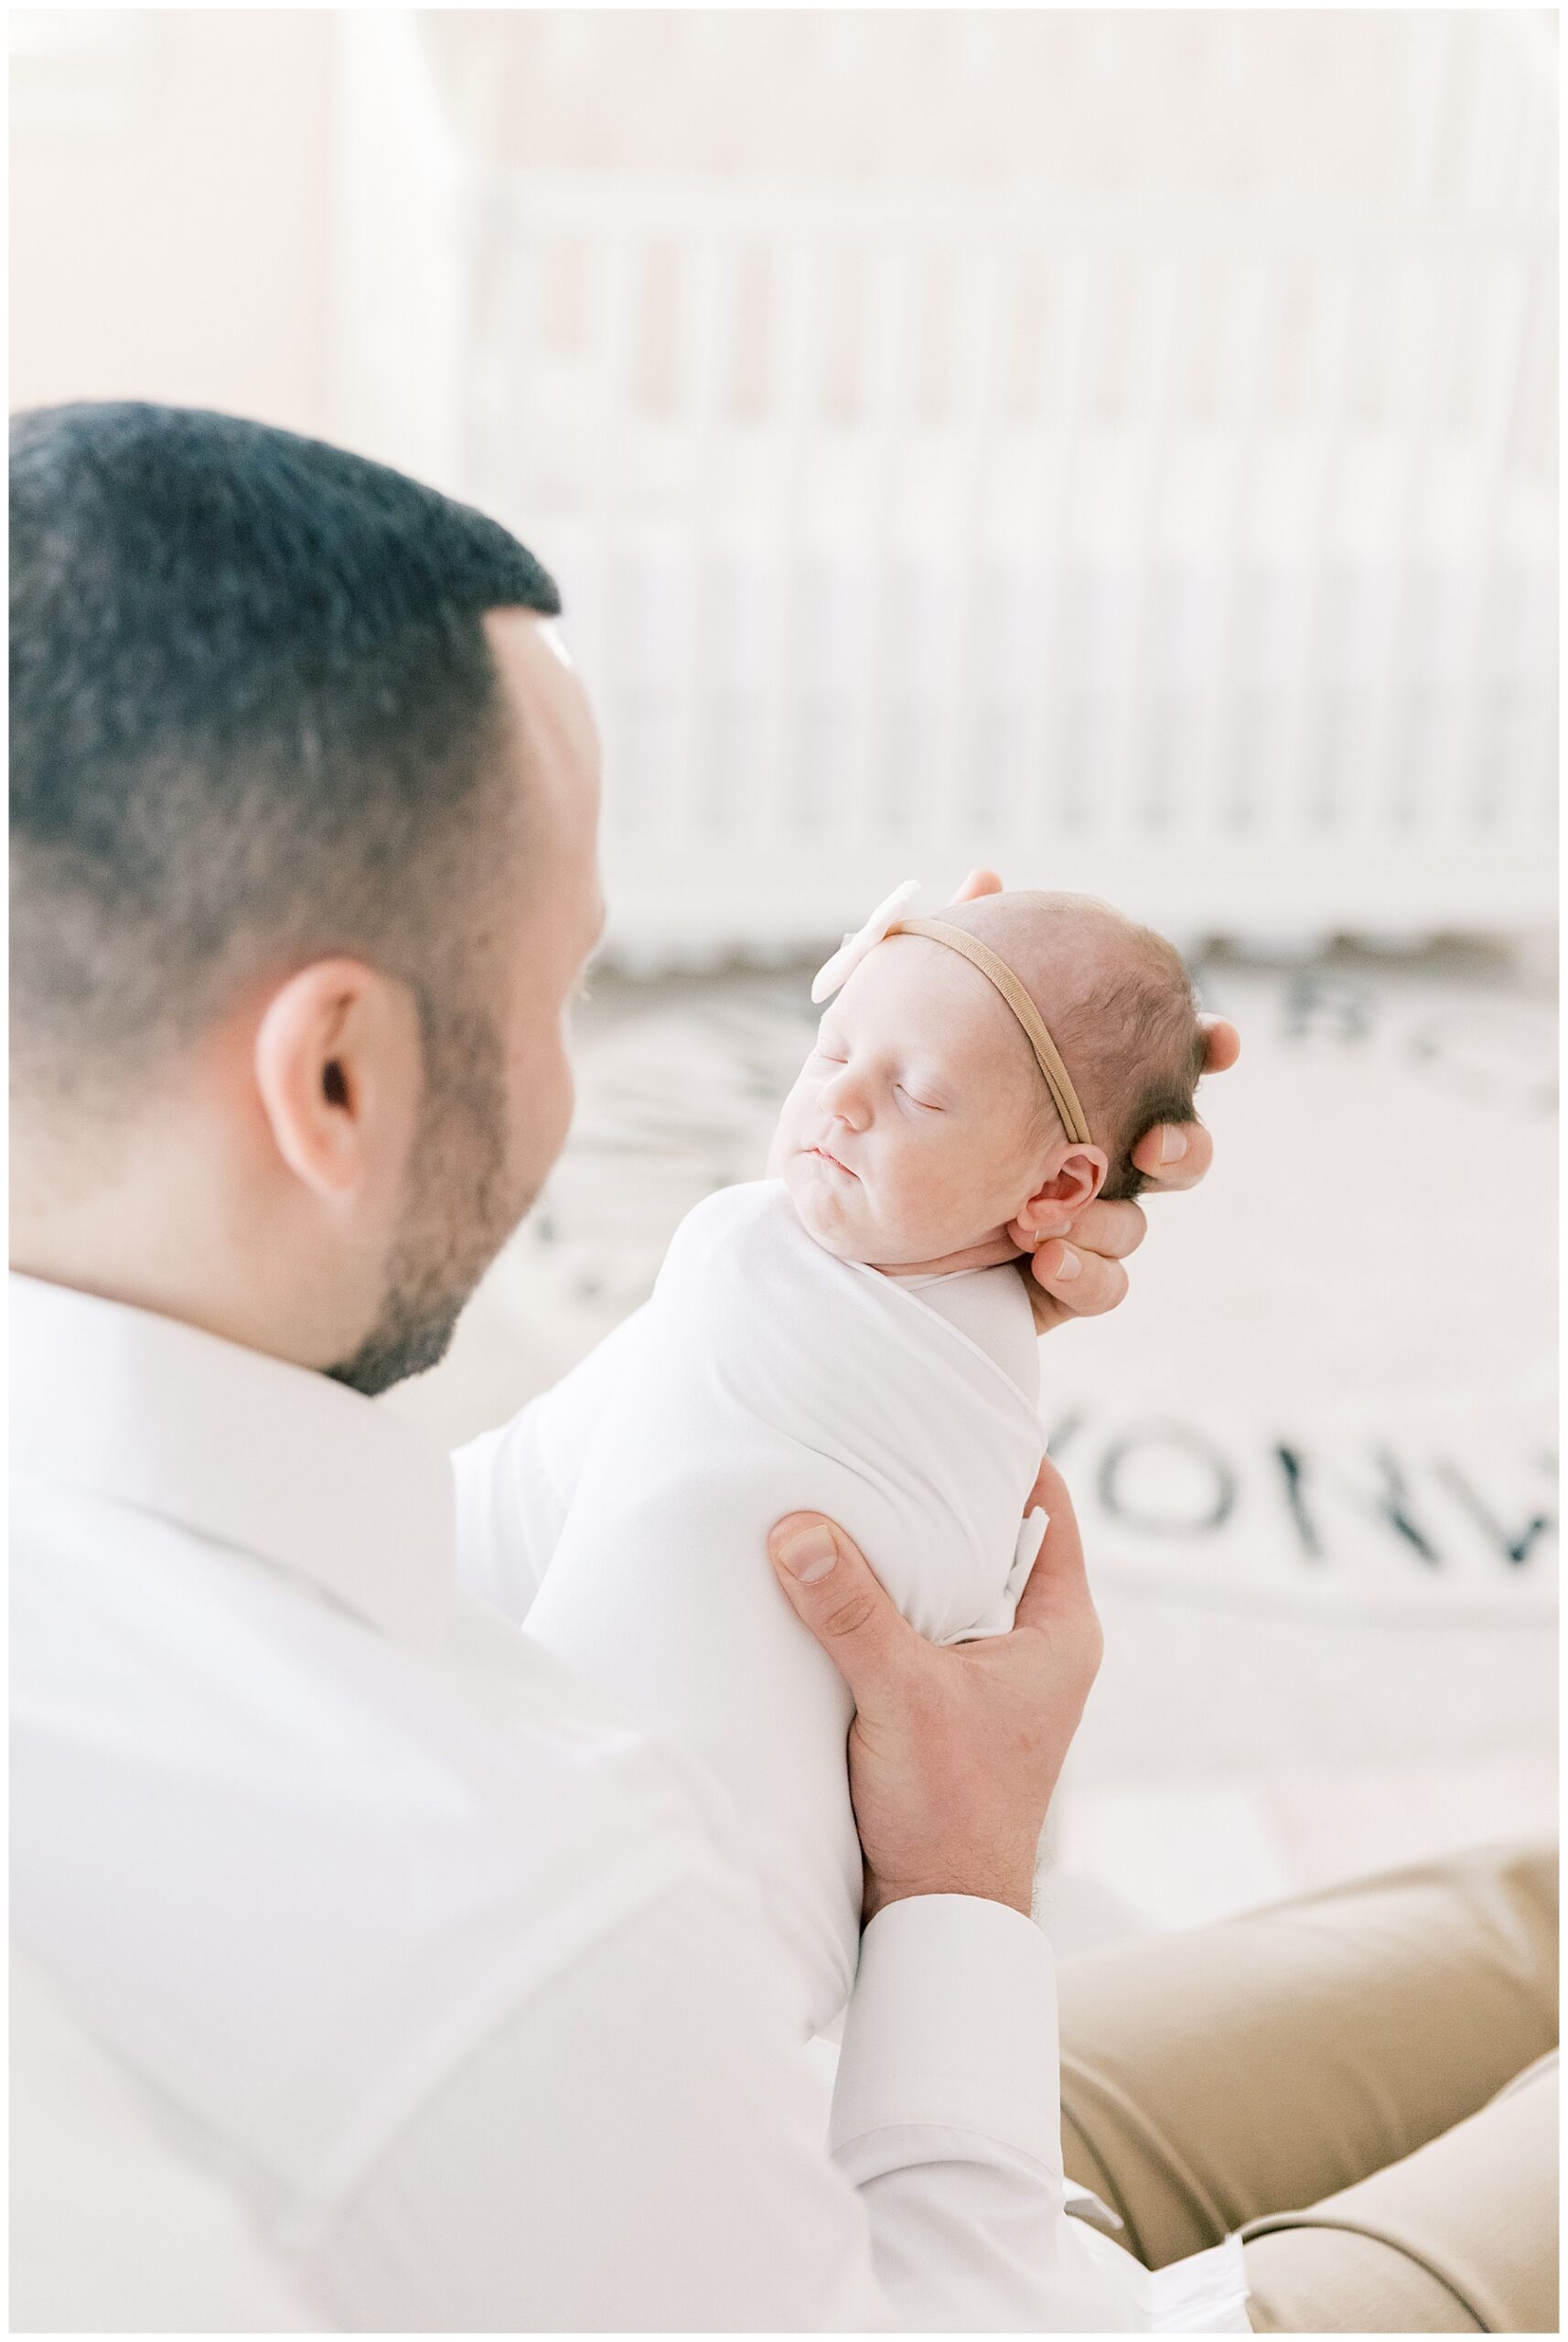 lifetyle newborn session in charlotte nc by Katie petrick photography
